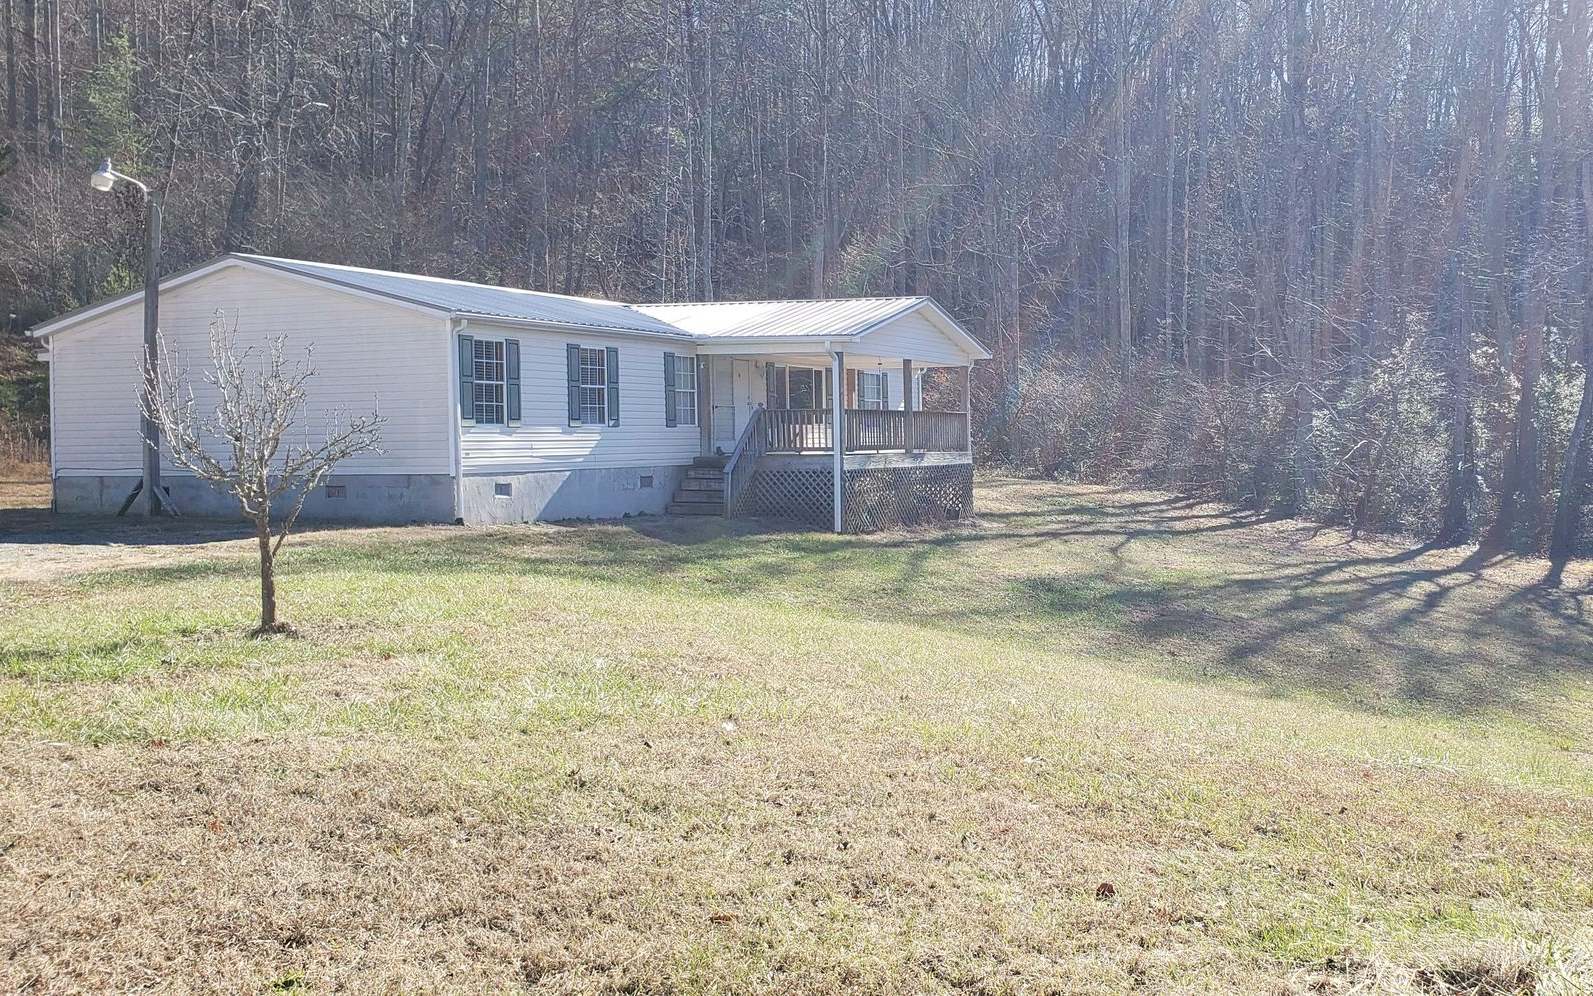 Nice gentle sloped lot with 3/2 doublewide home on permanent foundation. Front and back porches. Large yard in front and side of home. With a nice view. There is also water and power on the hill behind for an additional rental property for added income.